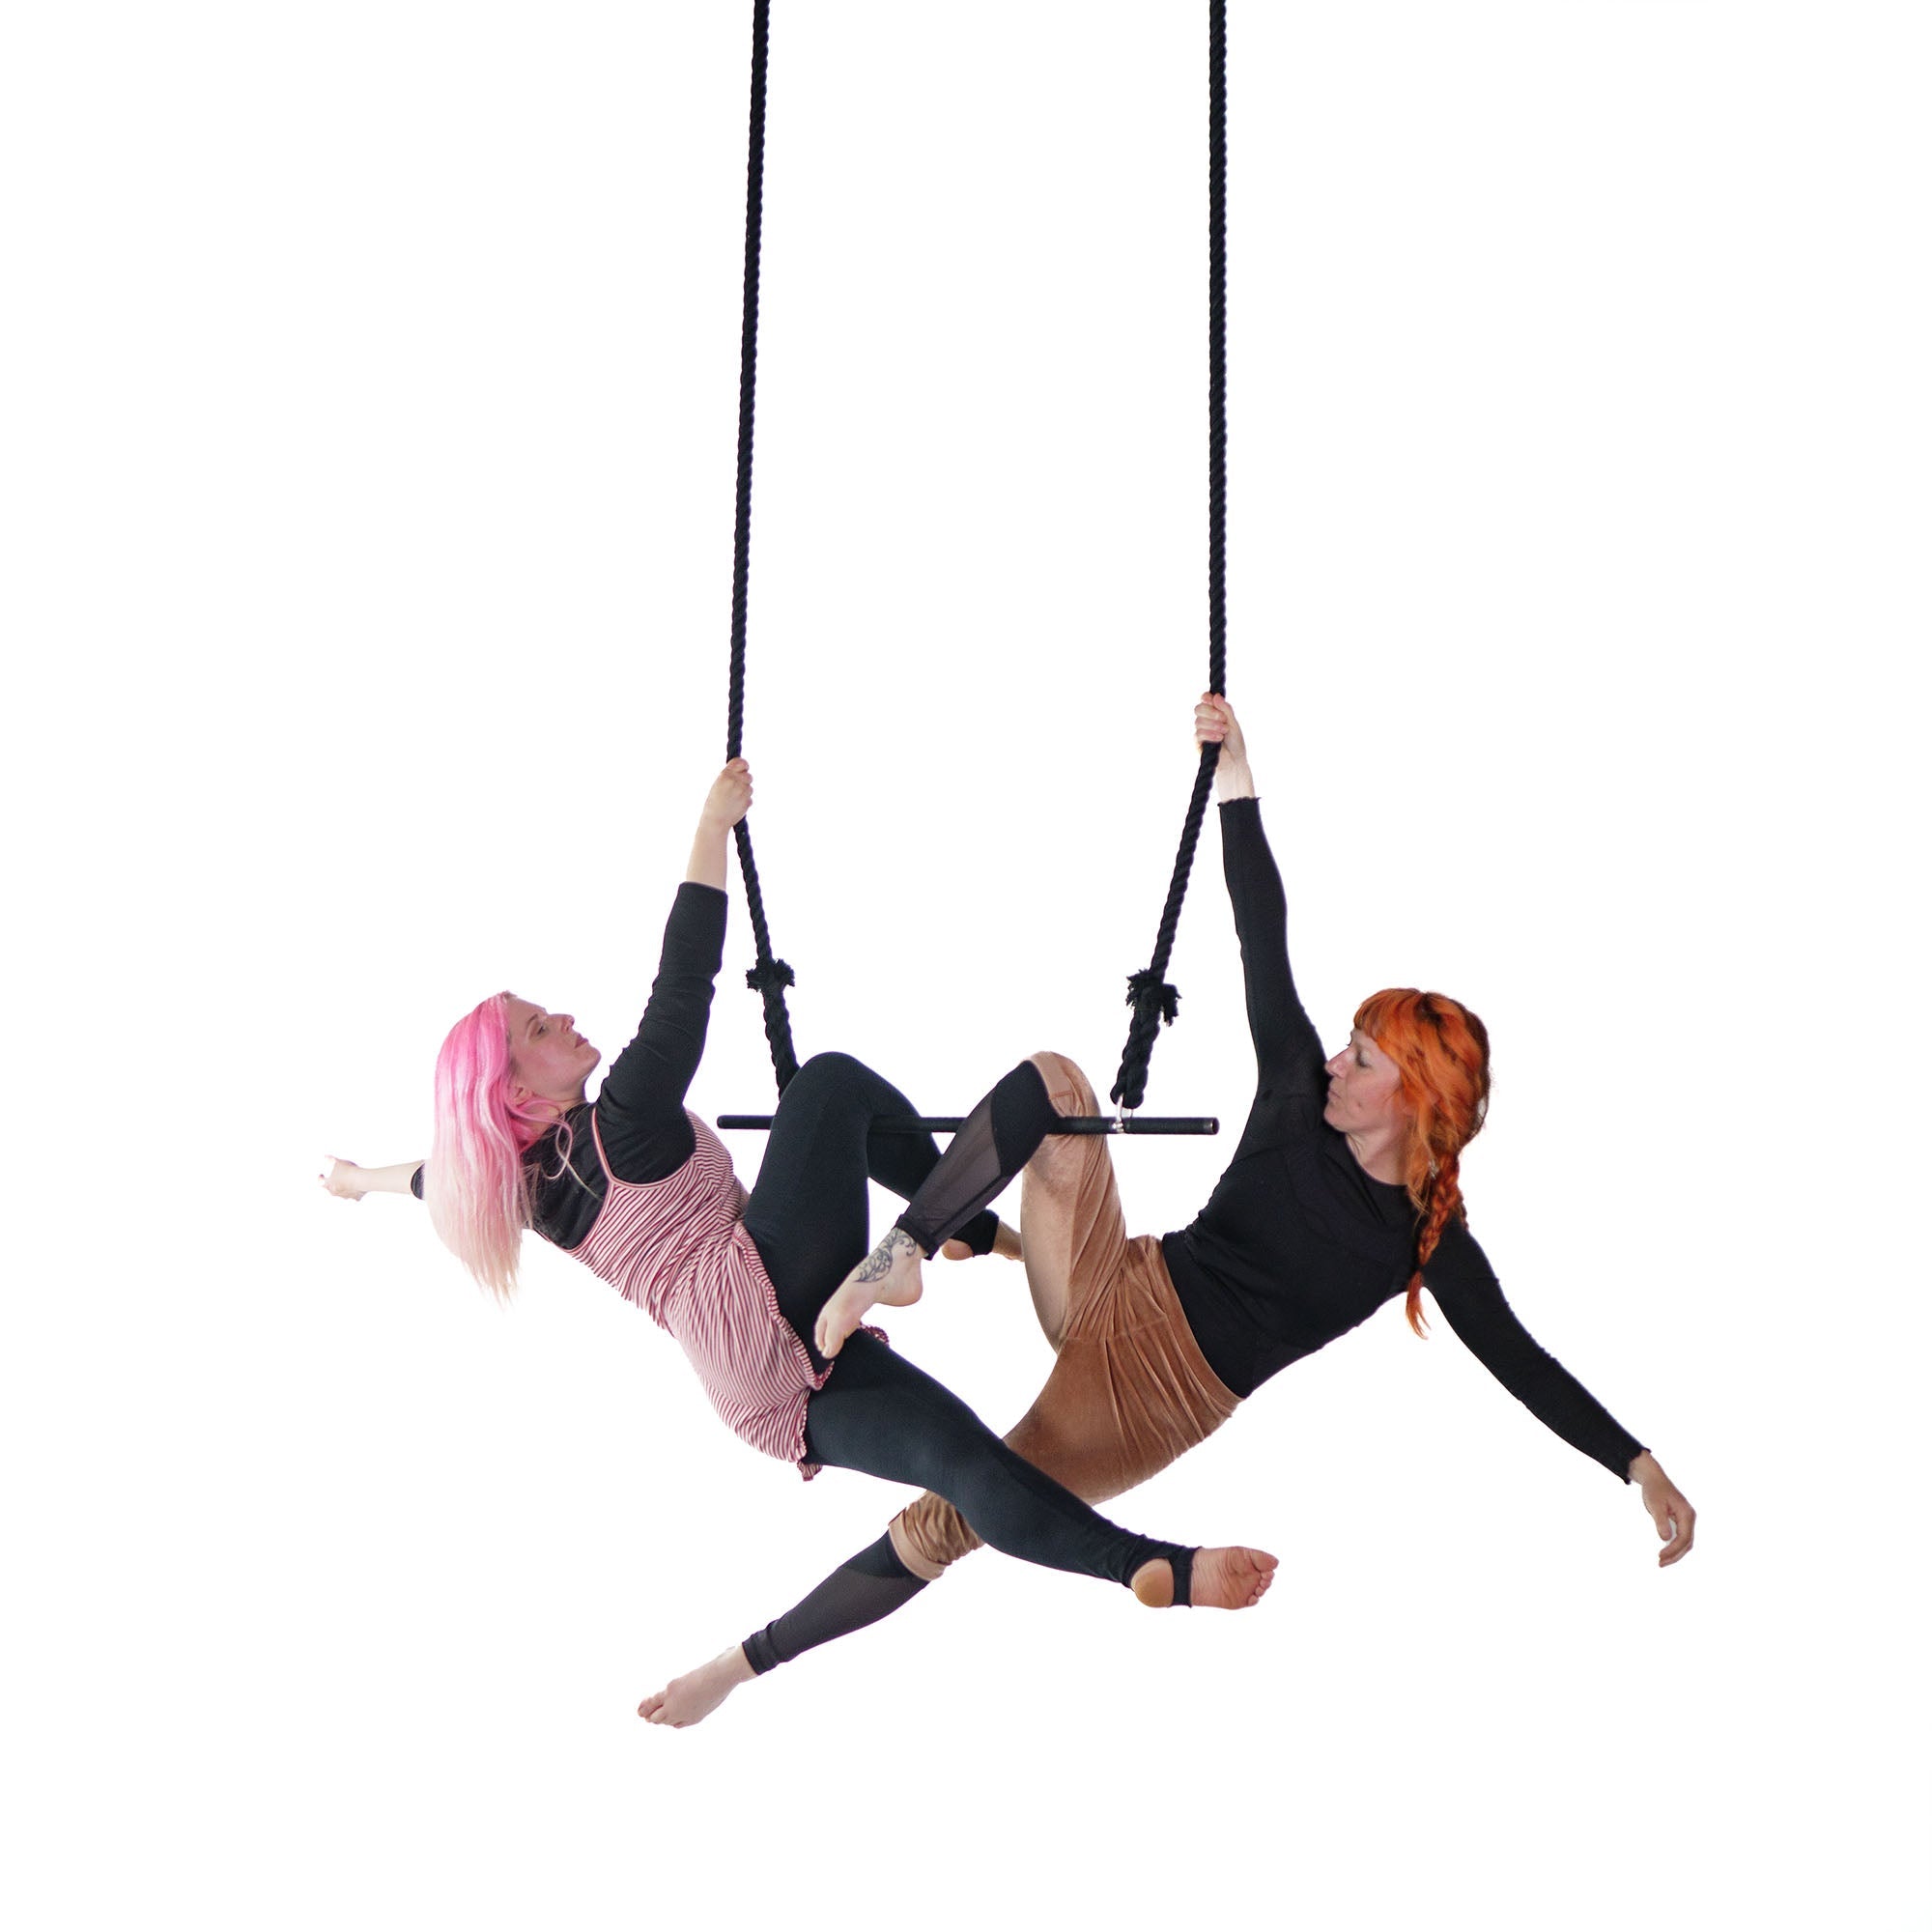 performers on extended trapeze